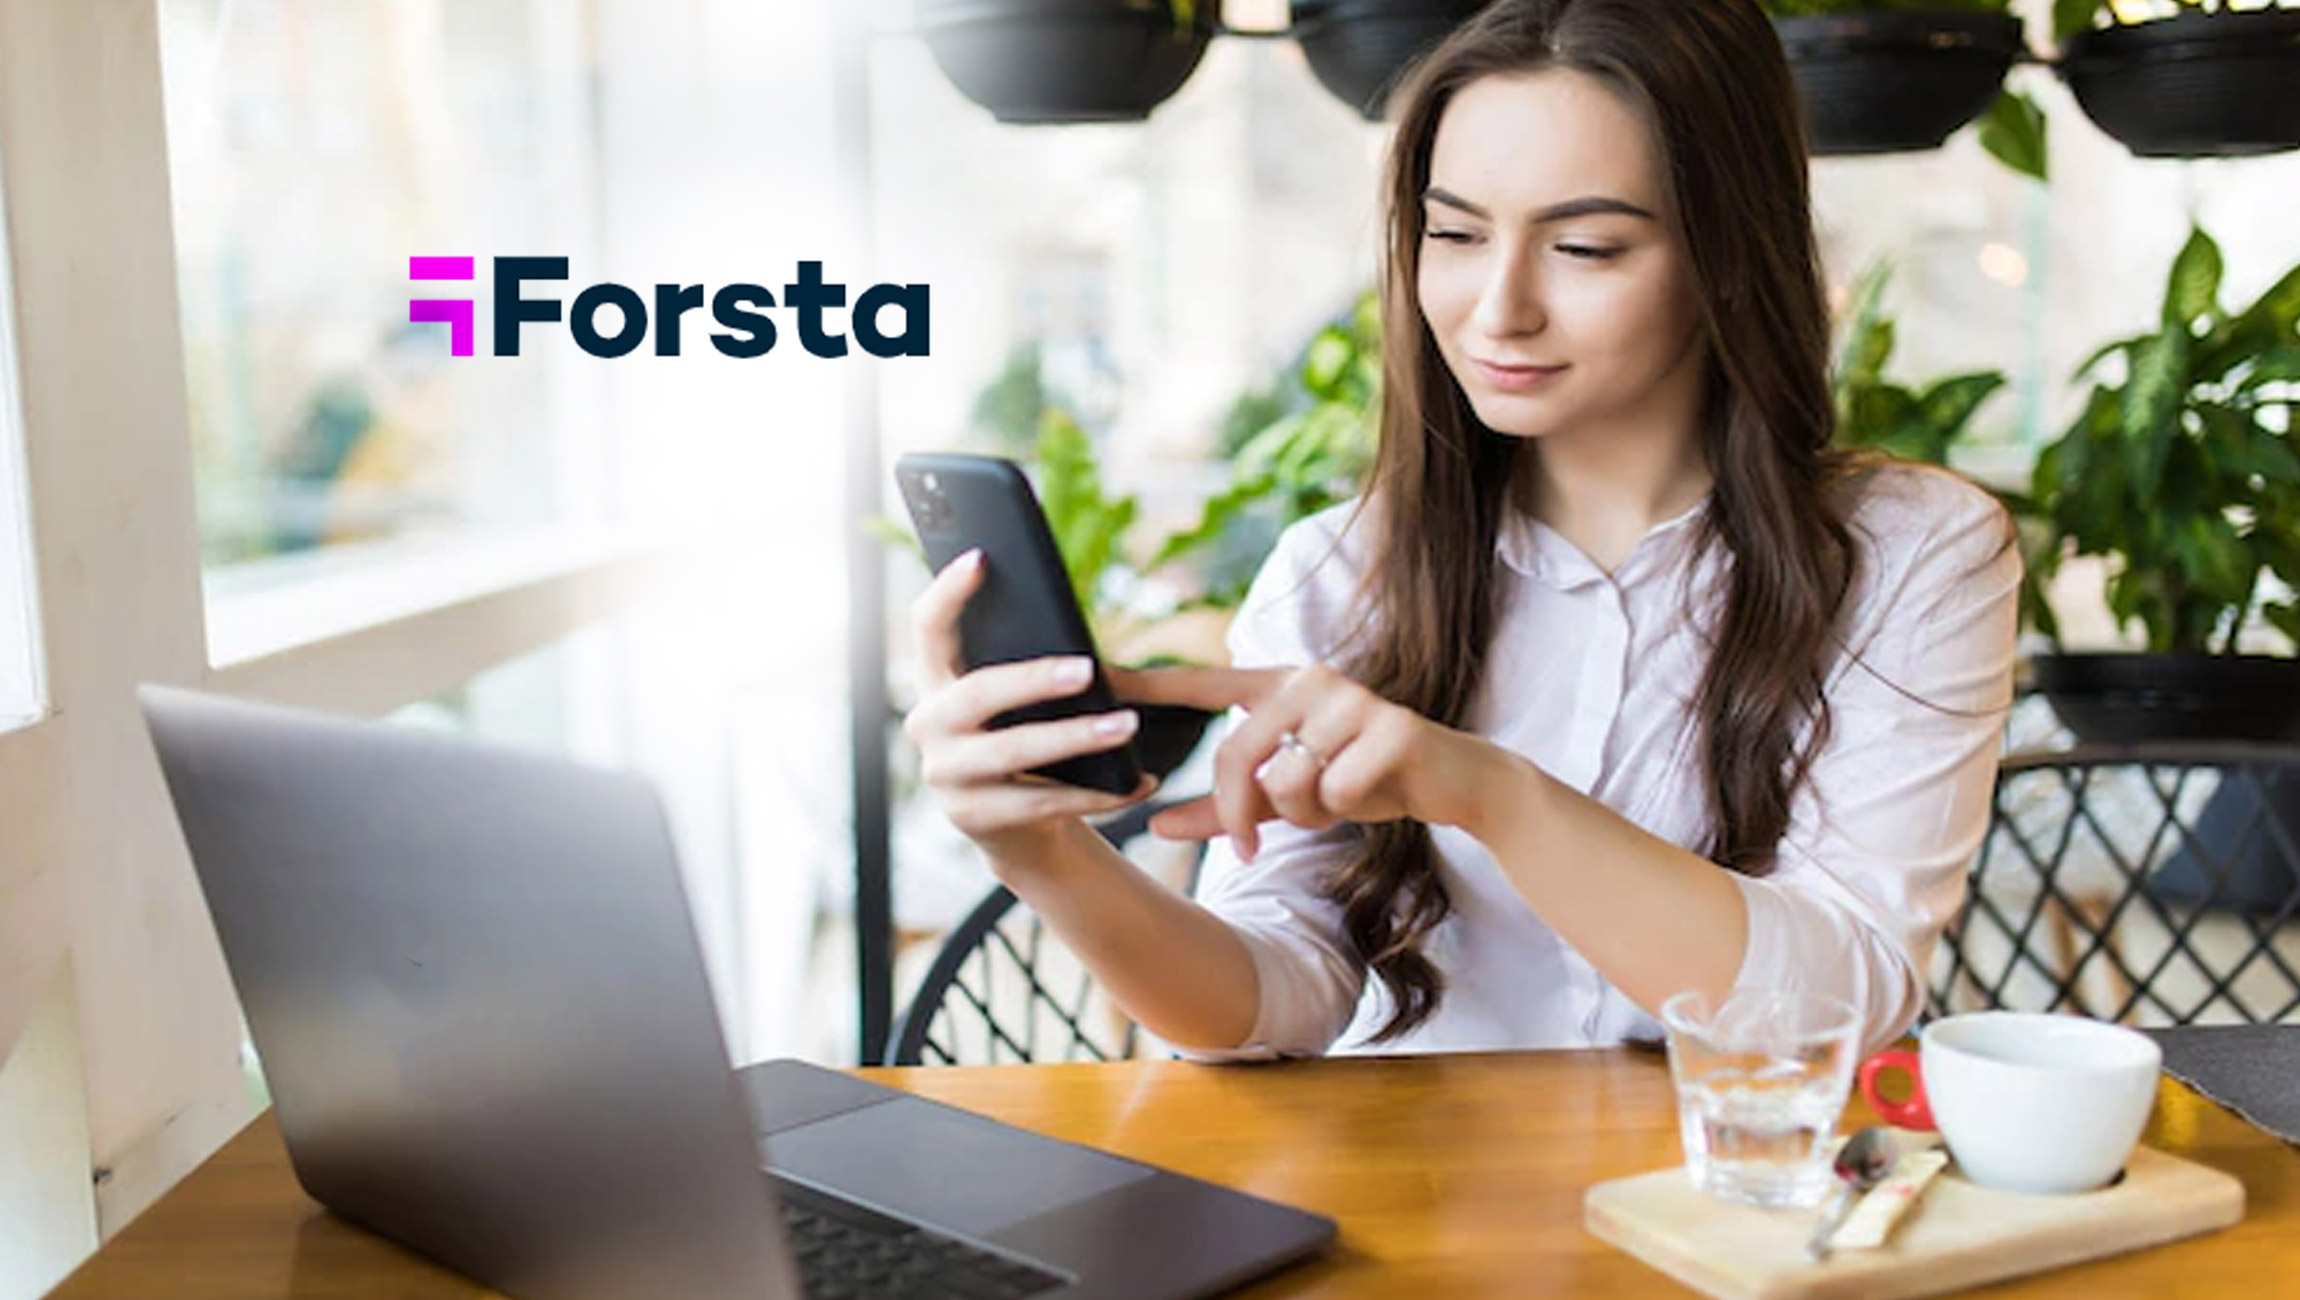 Forsta Launches Human Experience (HX) Partner Program to Offer White Labeled Customer Experience (CX) Offerings to Market Research Agencies